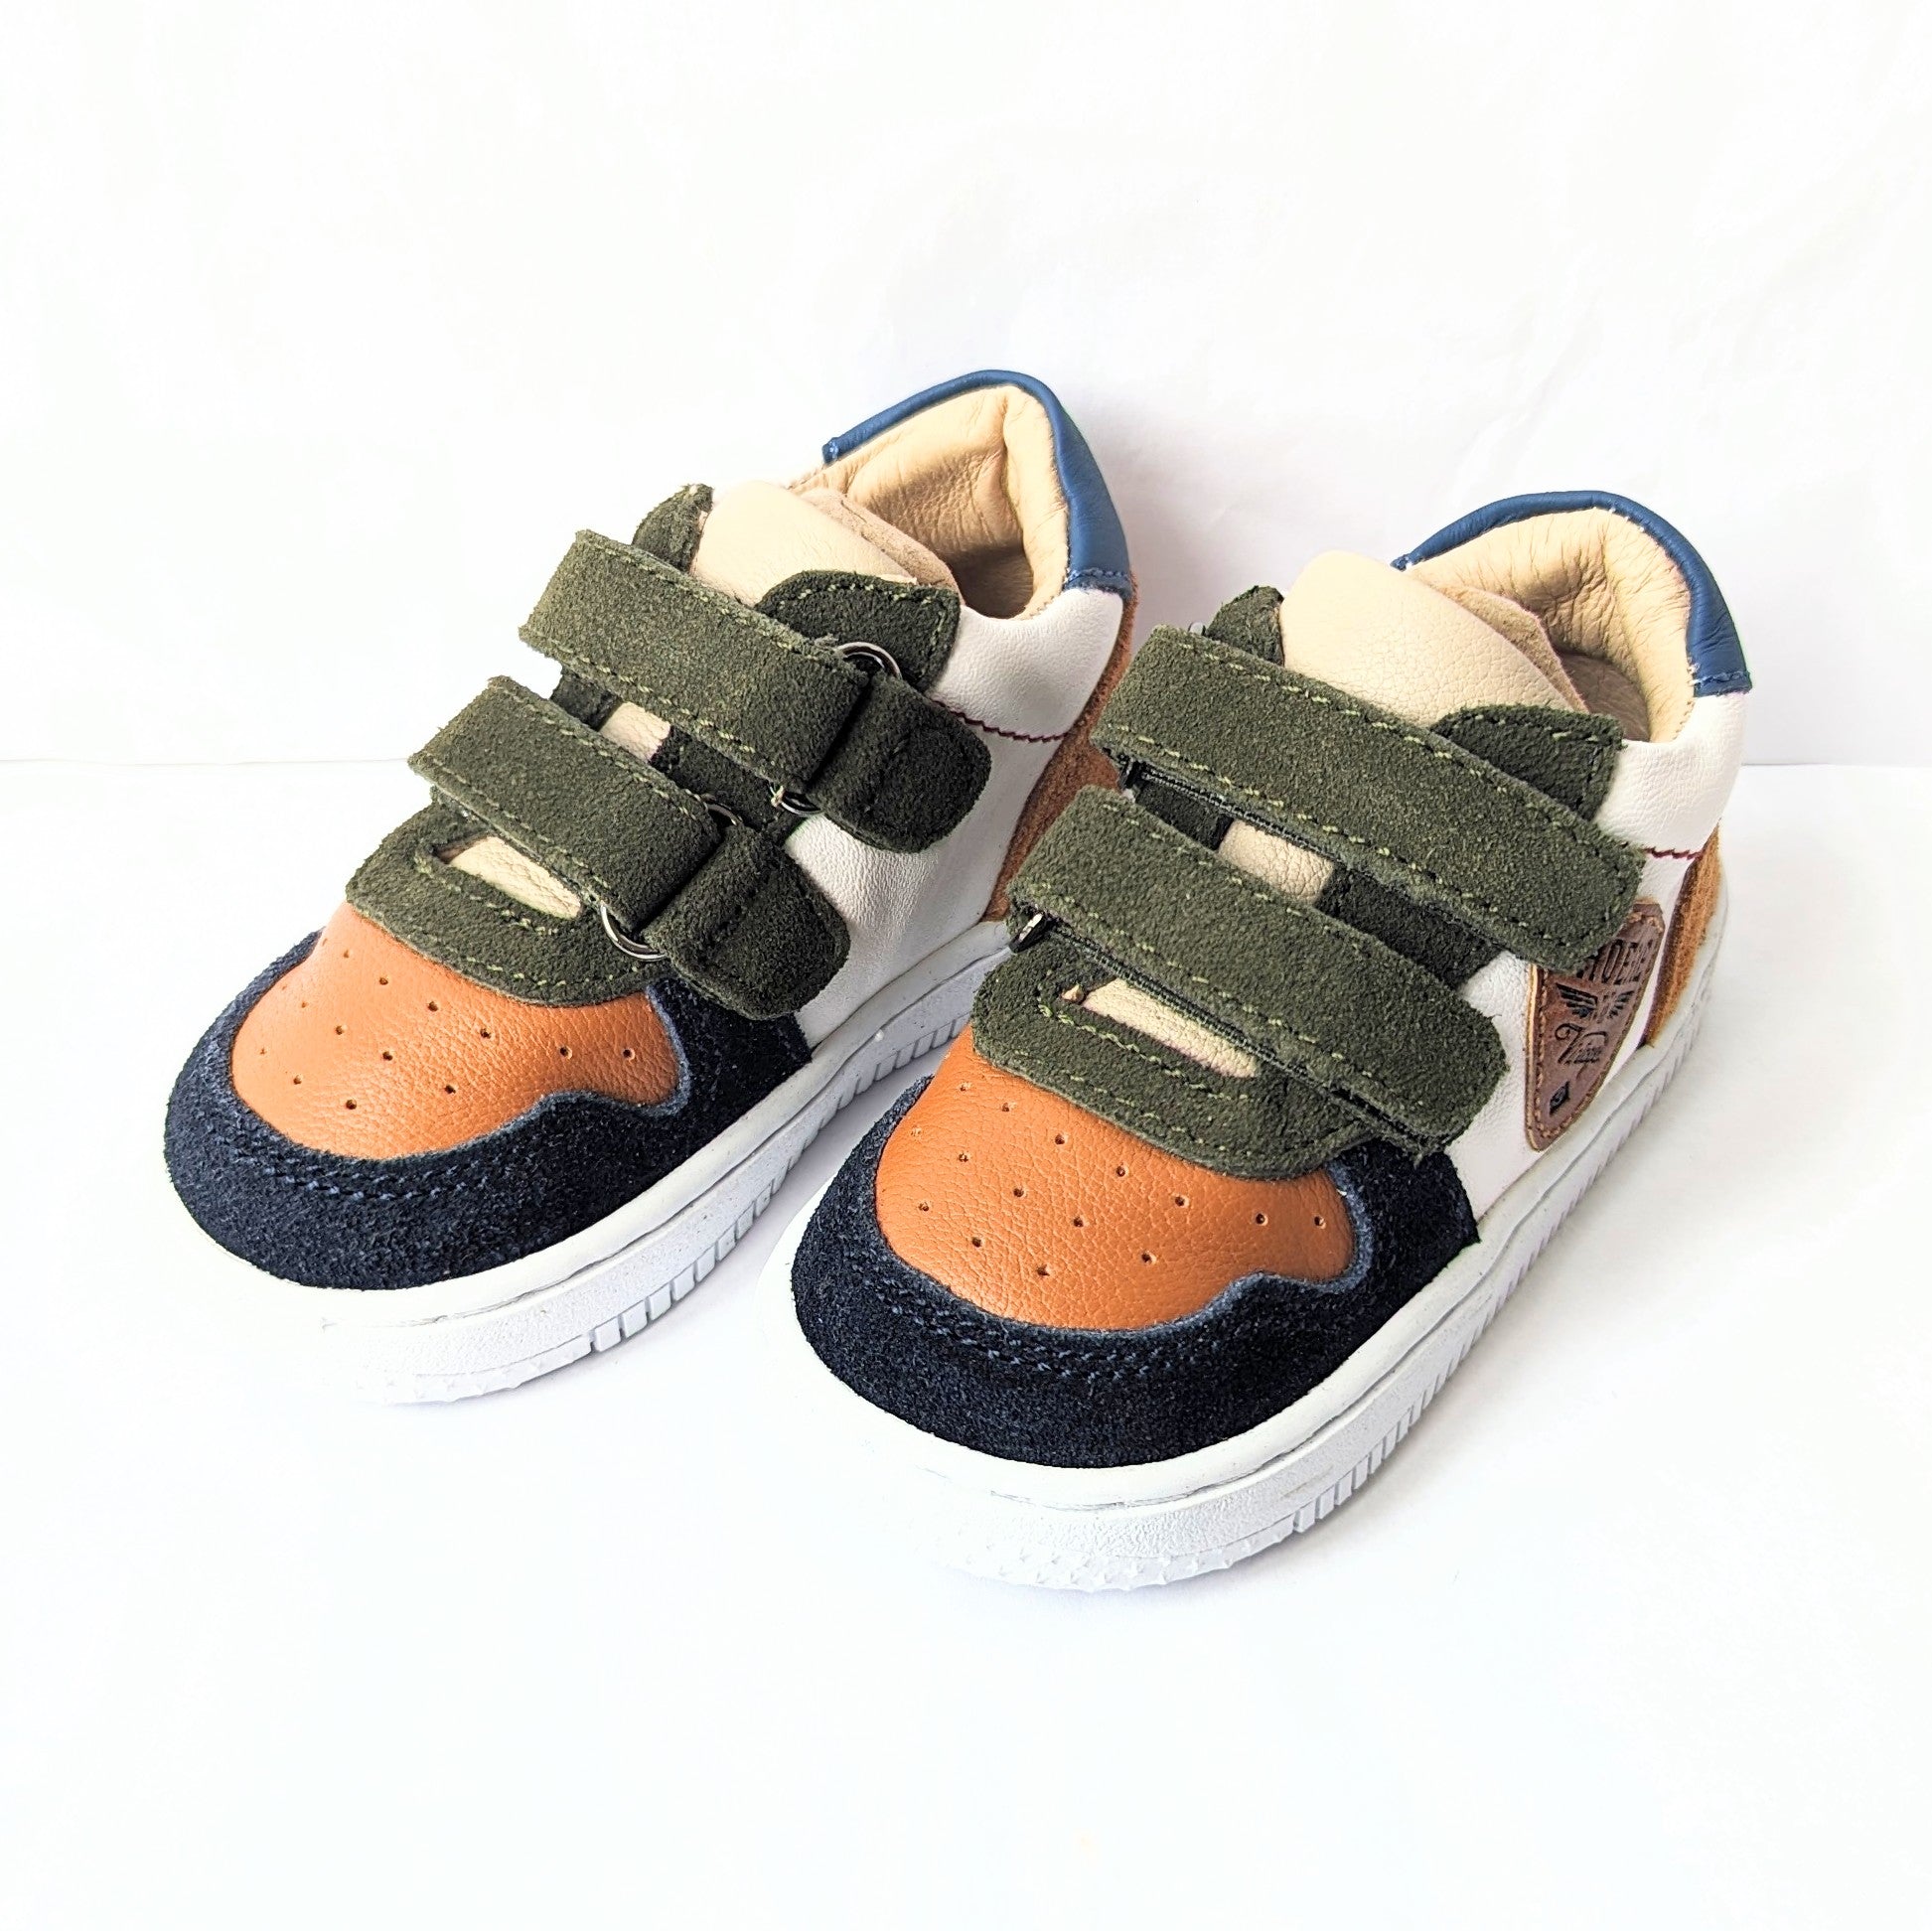 A pair of boys trainers by Shoesme, style BN23W003-D, in white, green, tan and navy leather/nubuck with double velcro fastening. Angled view.